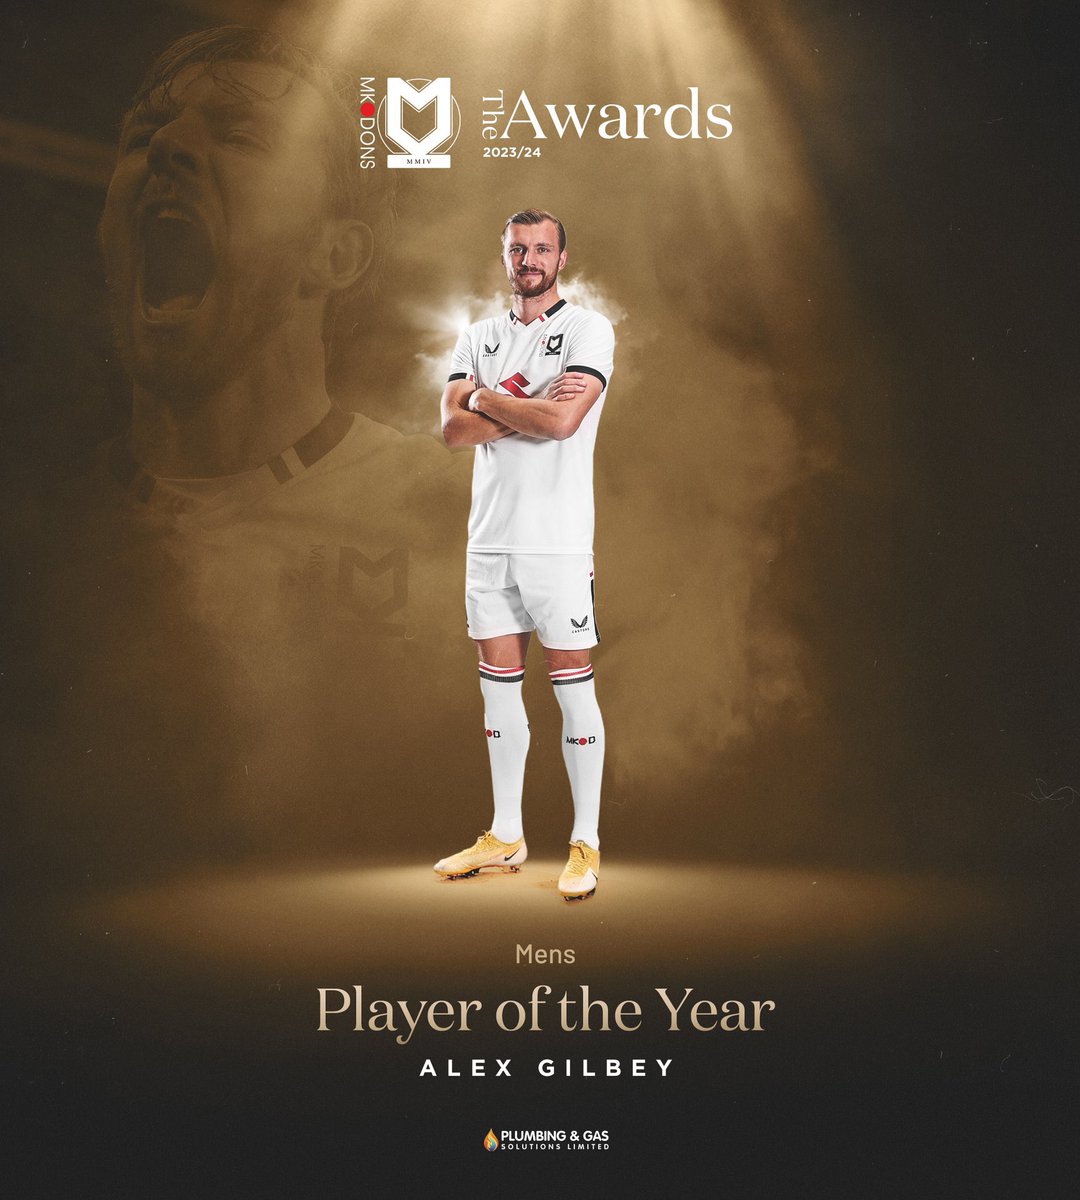 Big thank you to everybody who voted! Really thankful for the continued support all season. Now let’s get ready to attack the play offs together @MKDonsFC